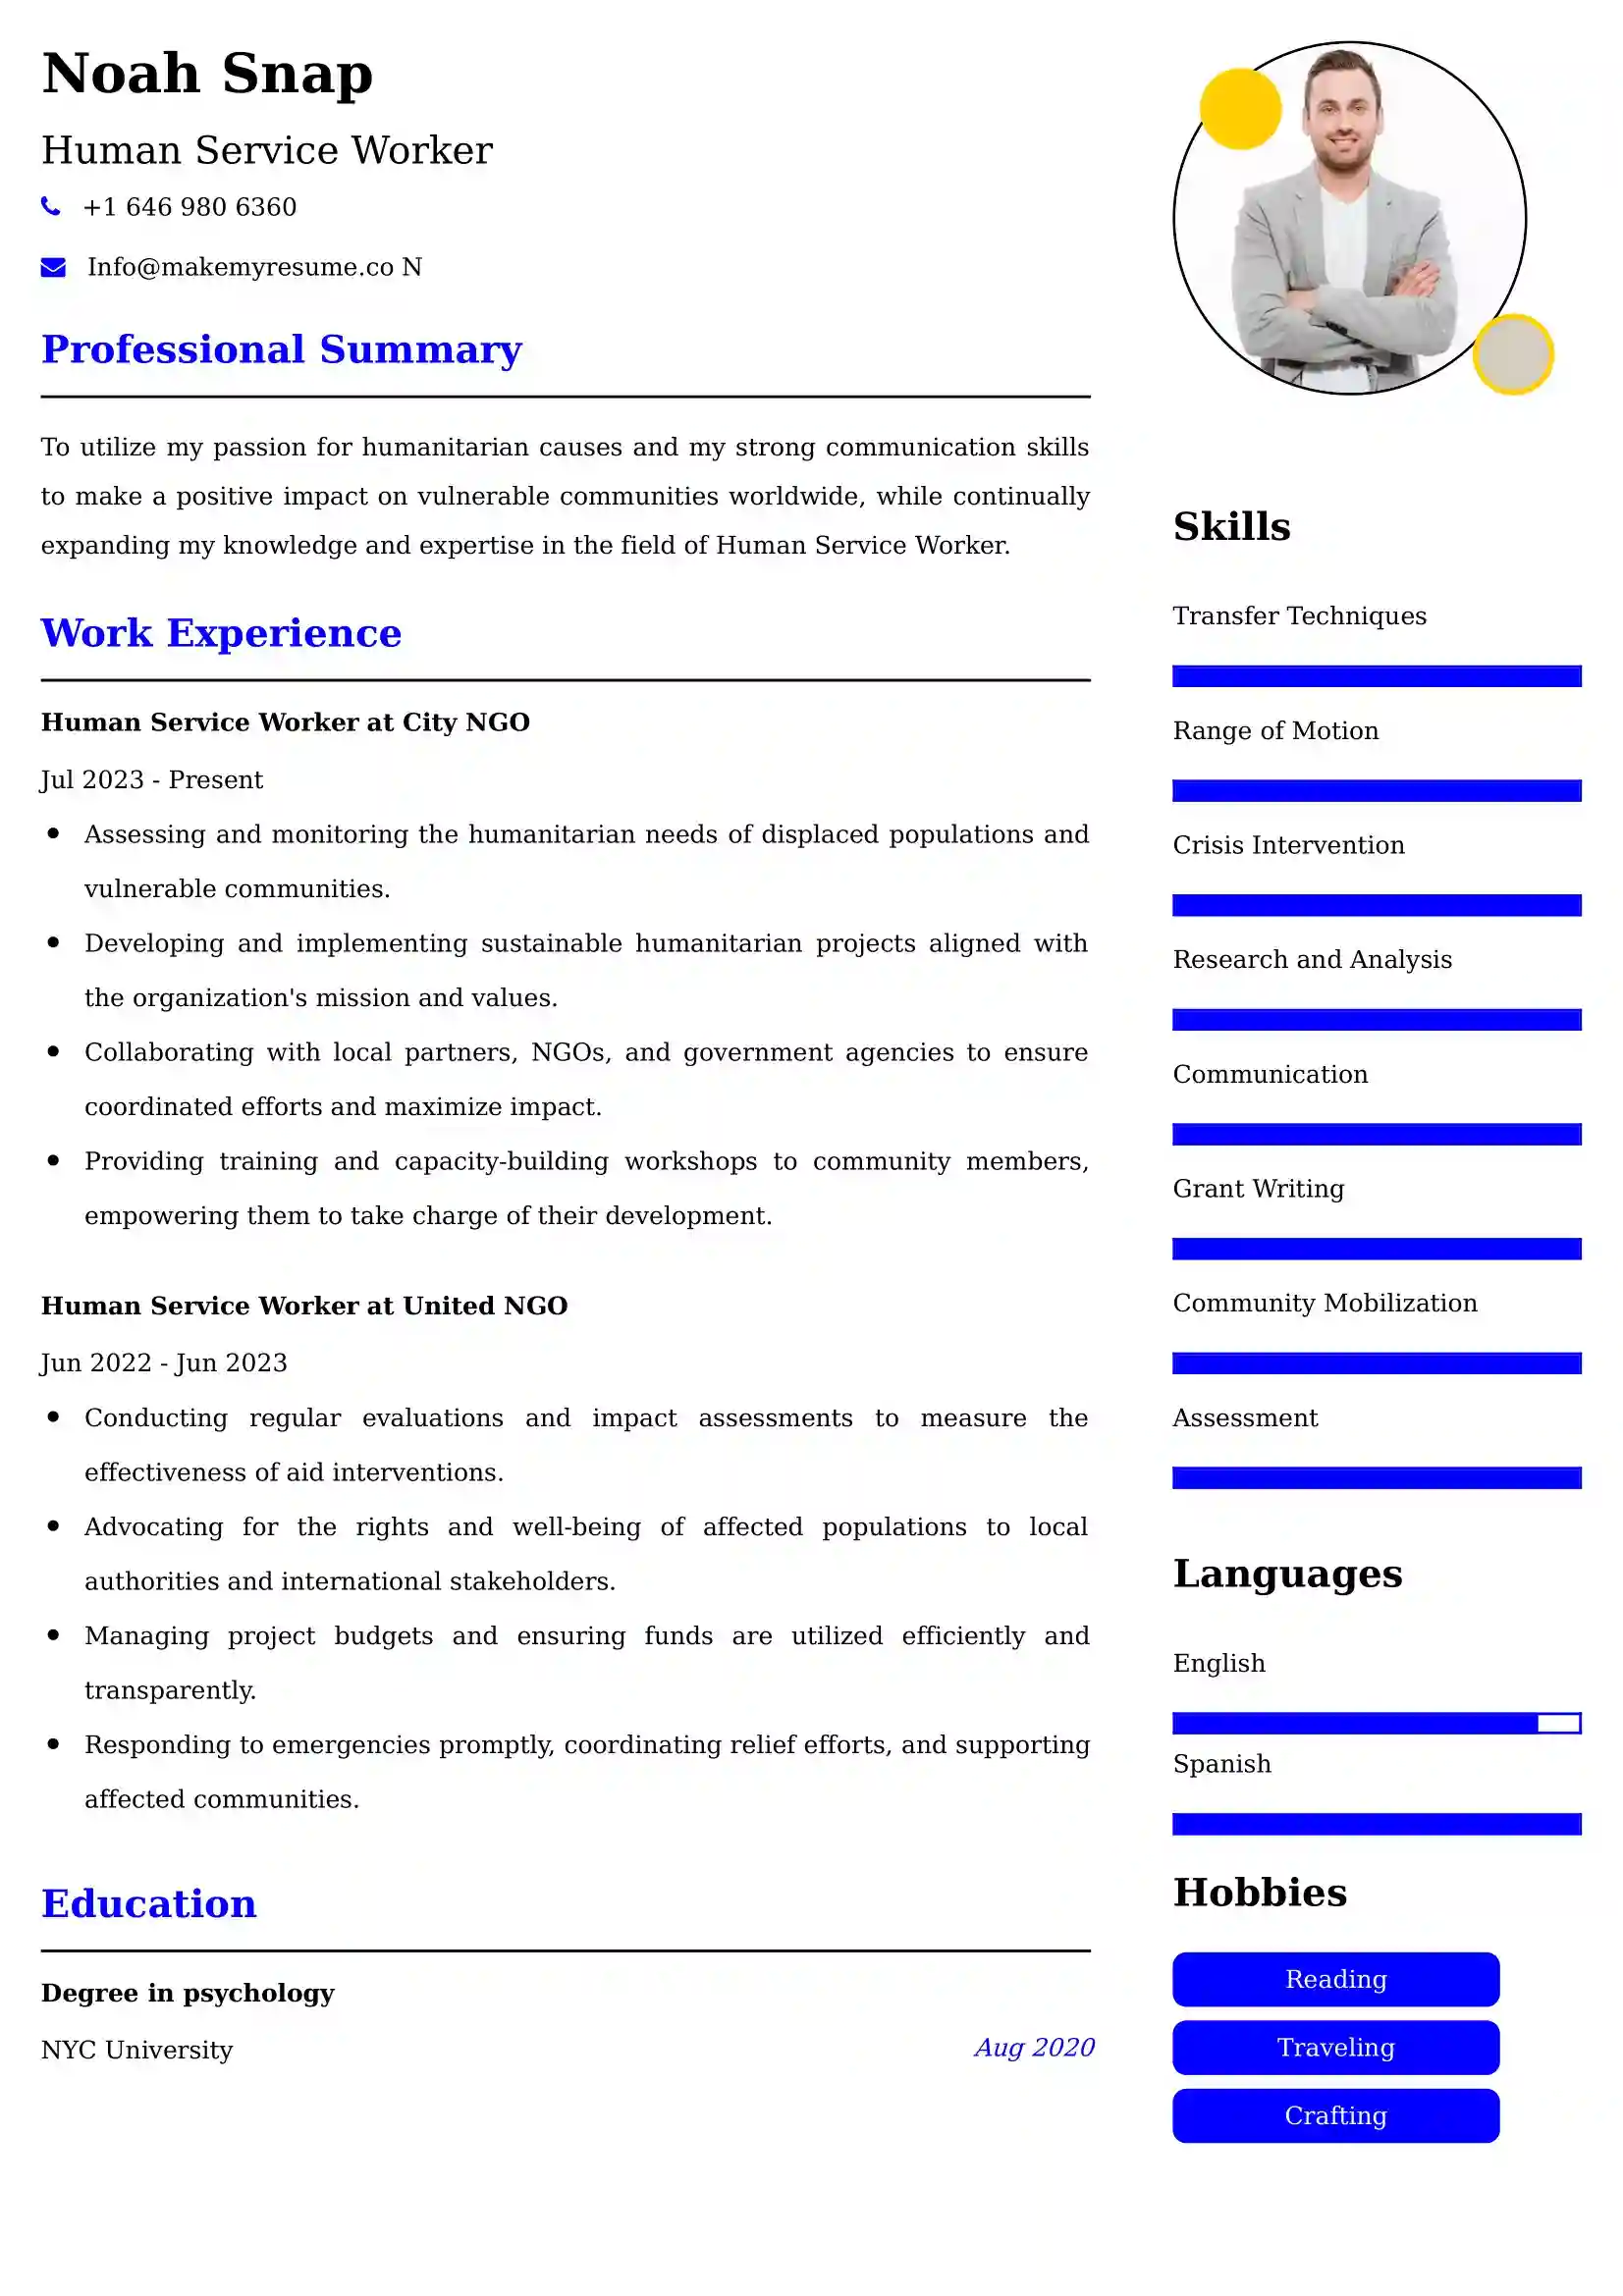 Human Service Worker Resume Examples - UK Format, Latest Template.